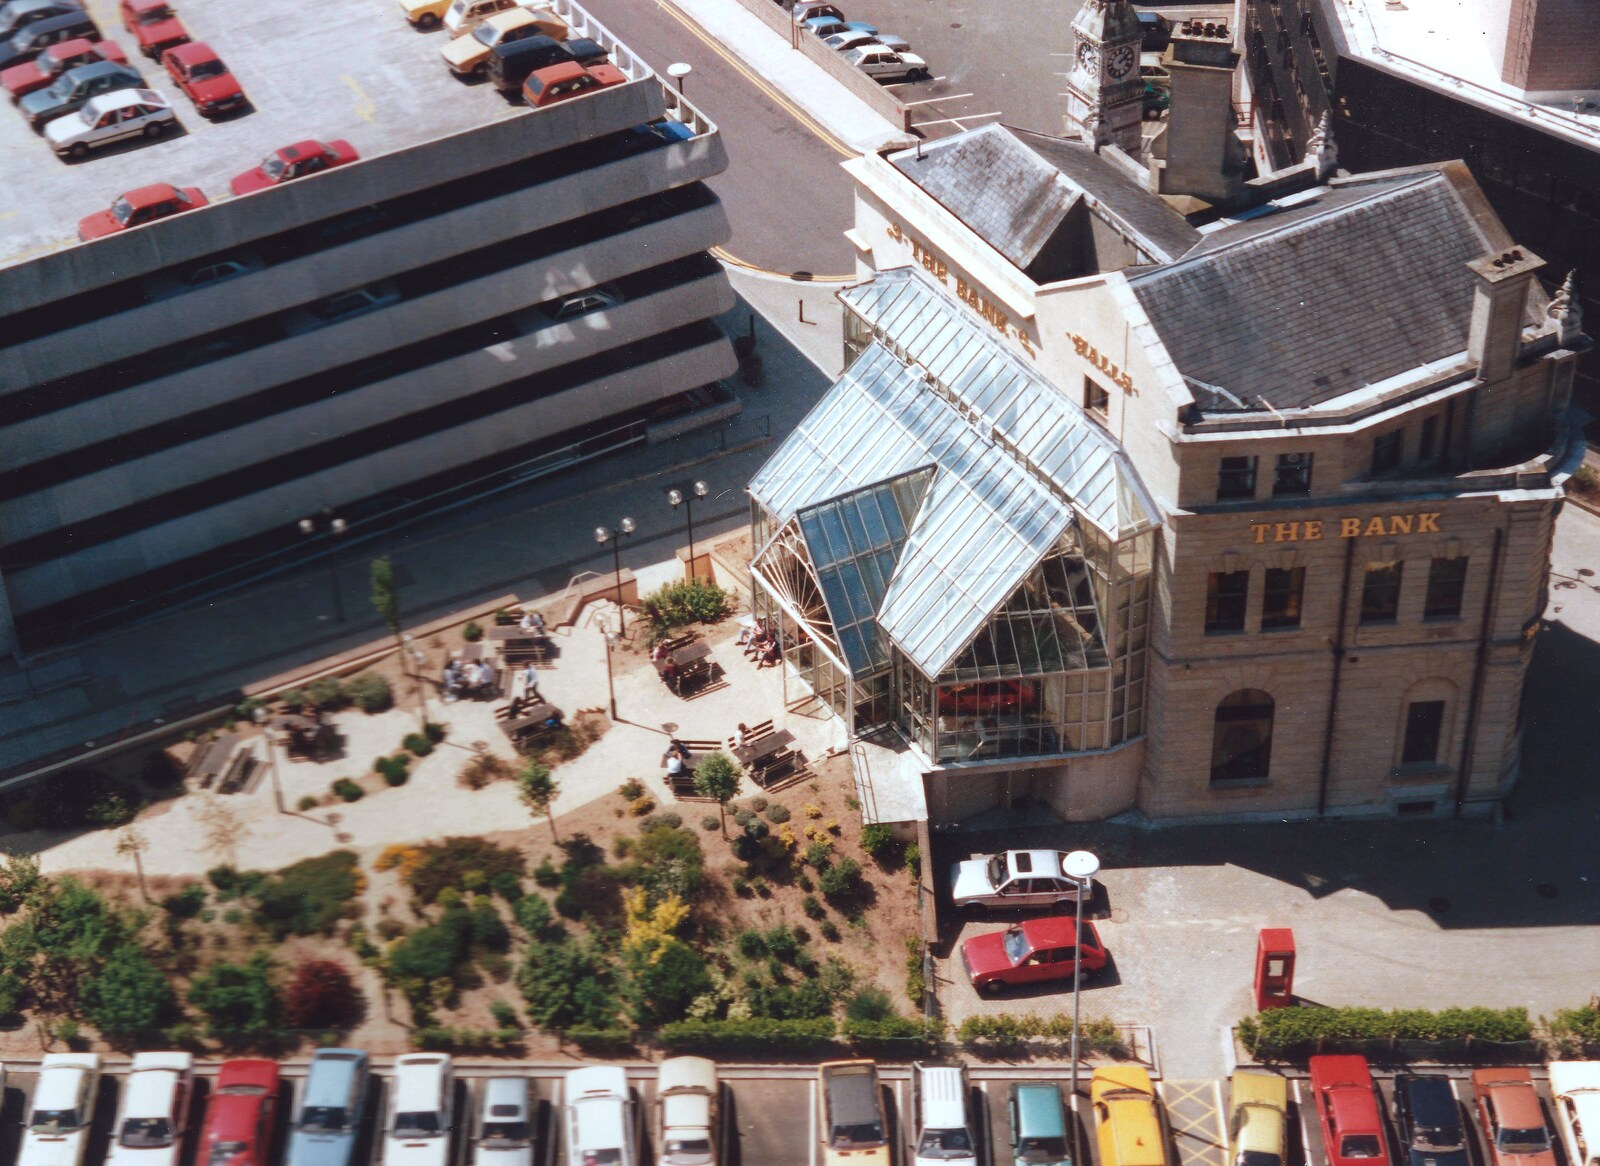 Regular student beer haunt The Bank from Aerial Scenes of Plymouth, Devon - 28th June 1987